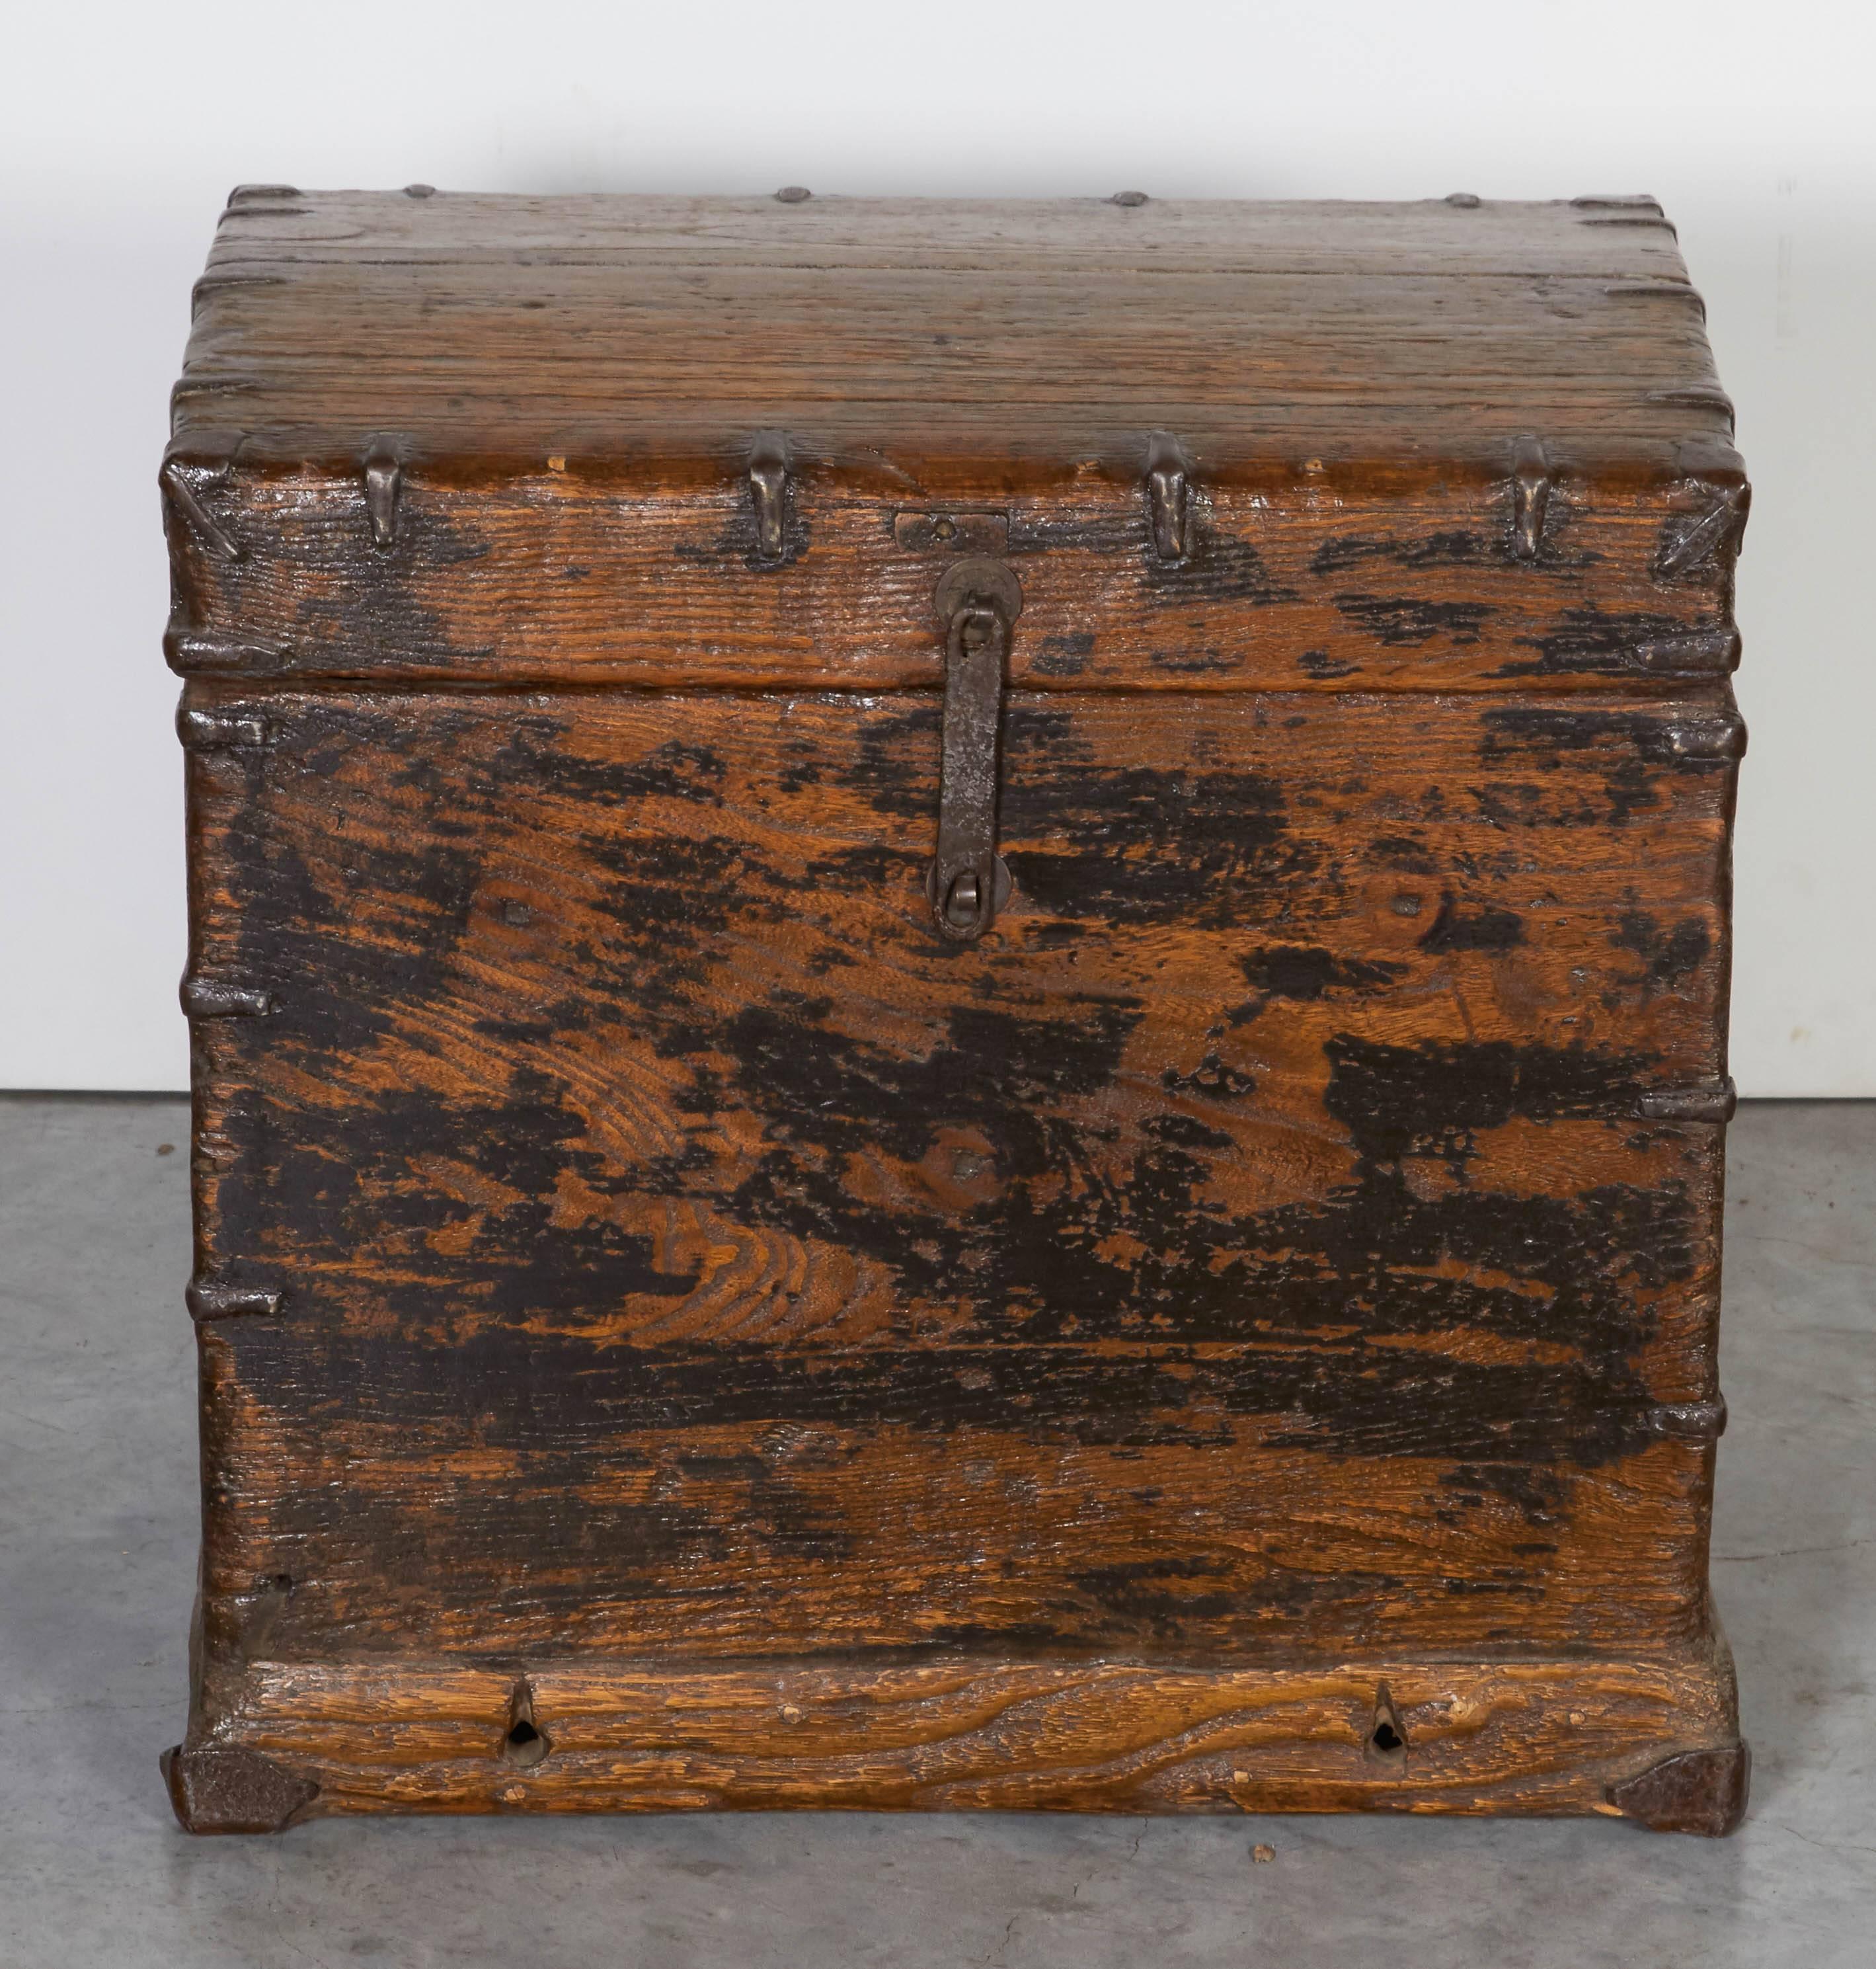 A gracefully shaped antique Chinese chest with traces of old lacquer creating a striking patina. This piece features it's original iron fittings. From Shanxi Province, circa 1900.
BX452.